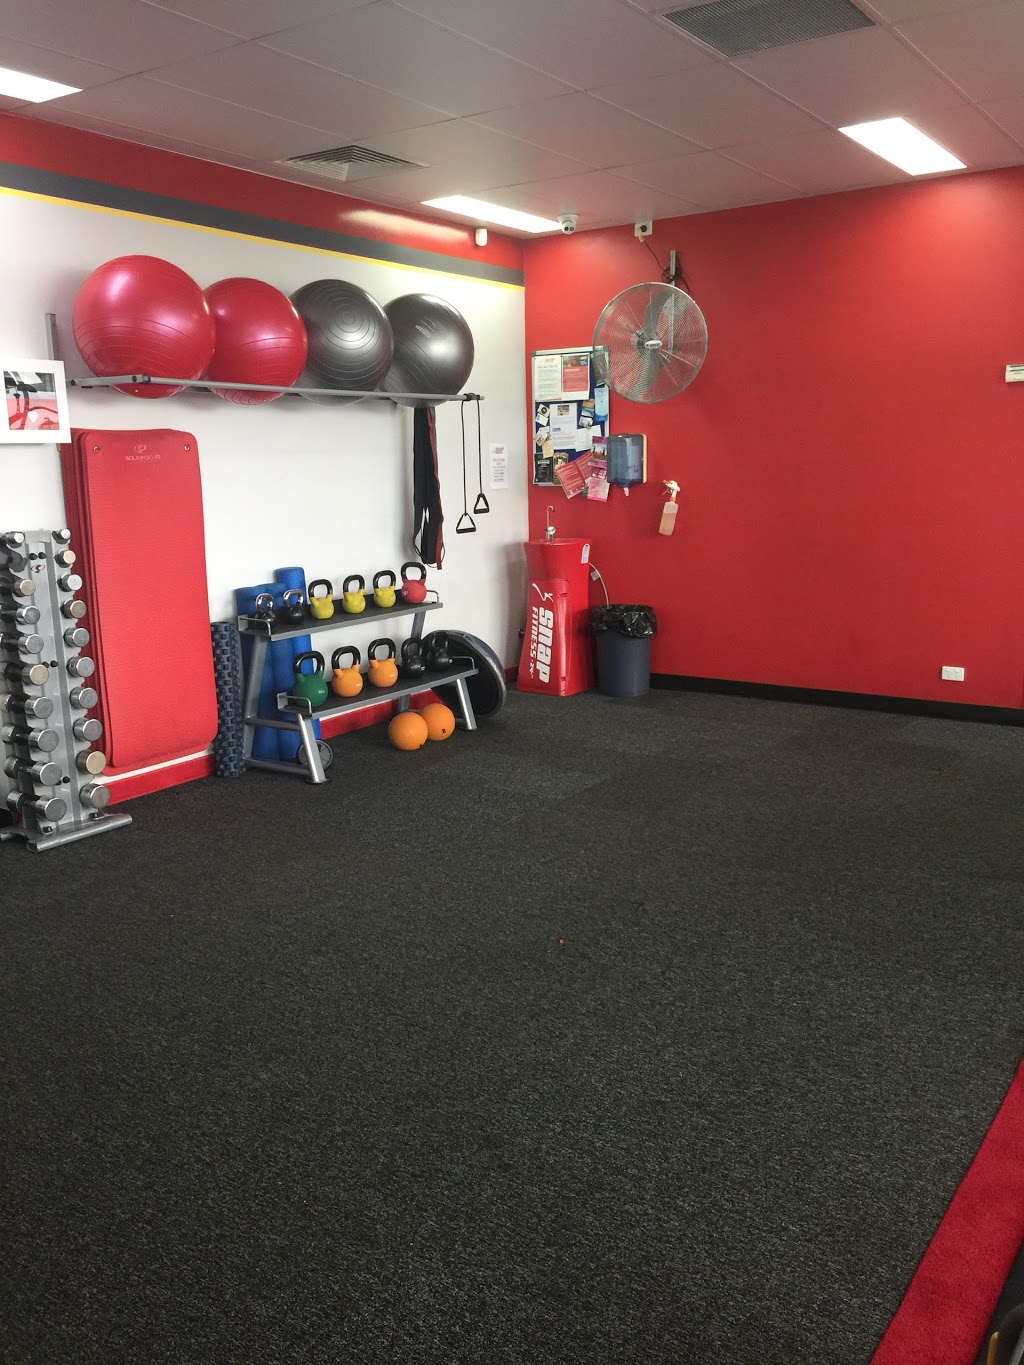 Snap Fitness Mackay Northern Beaches | gym | 1, Northern Beaches Central, 10 Eimeo Rd, Rural View QLD 4740, Australia | 0478201820 OR +61 478 201 820